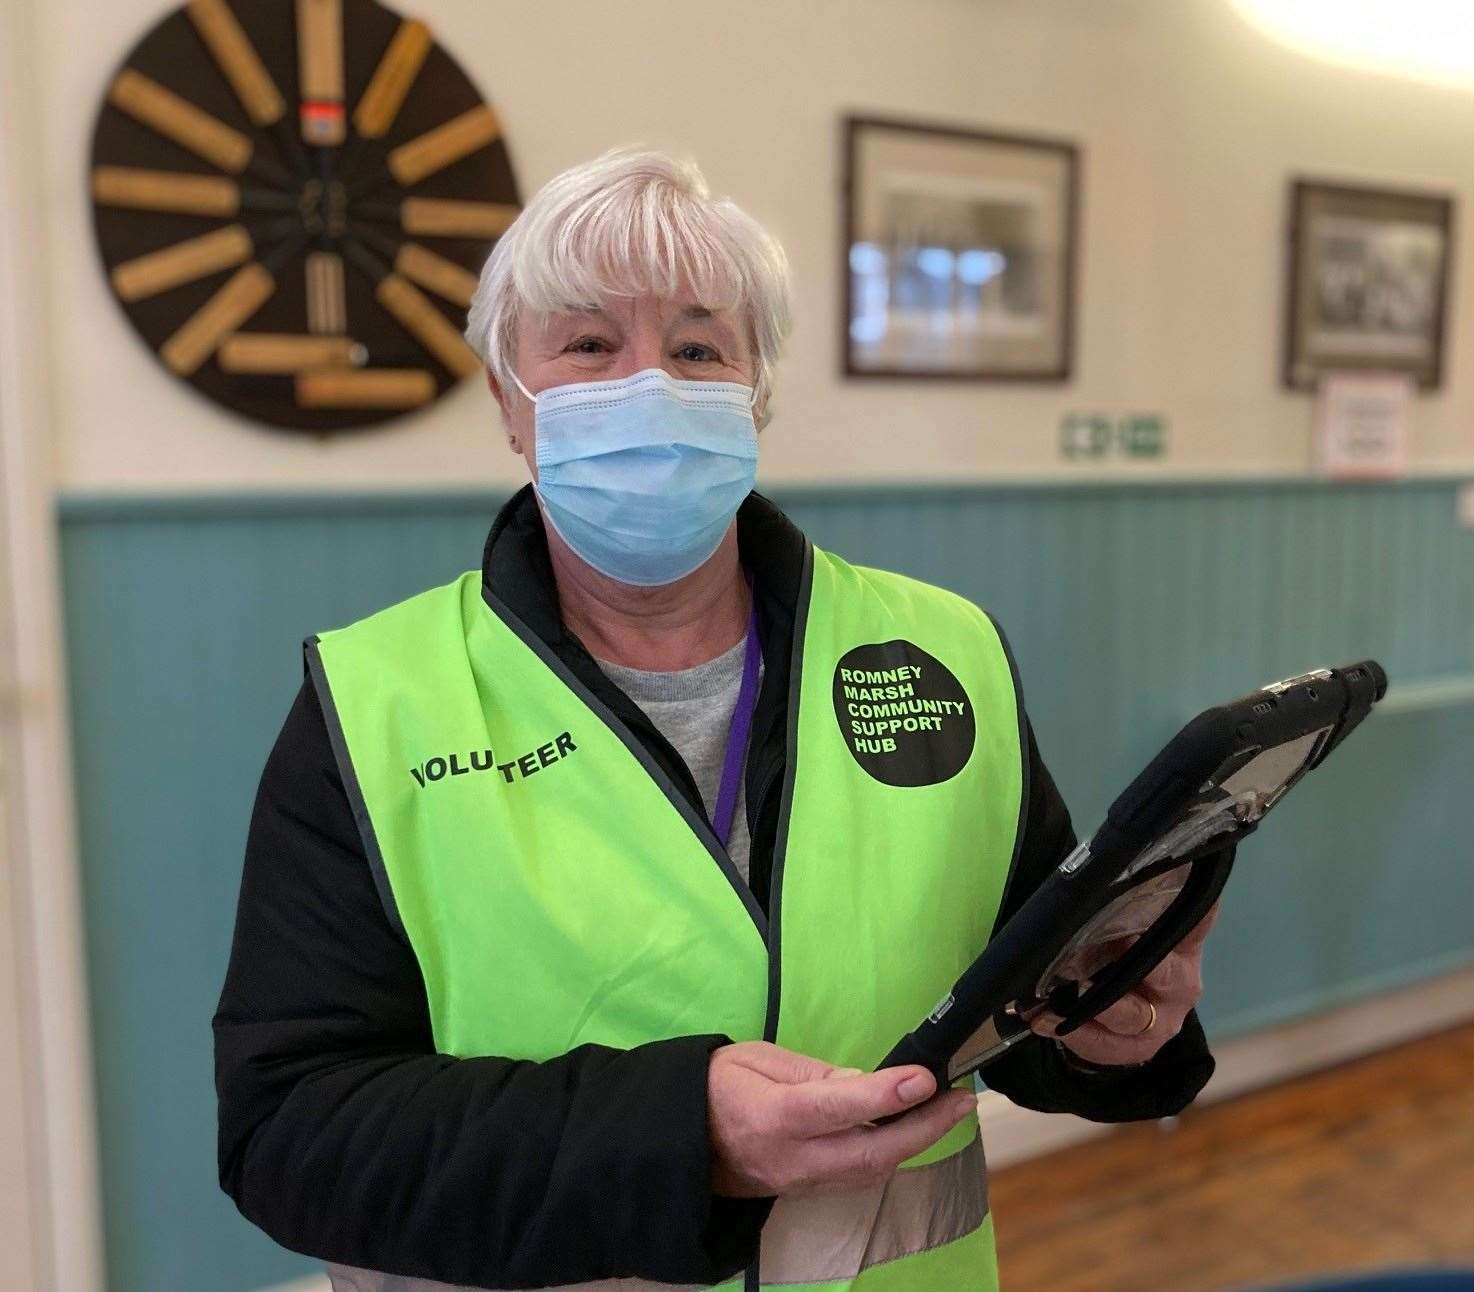 Sue Brett is one of the volunteers who have given 15,000 hours to help support the vaccination drive. Picture: Romney Marsh Community Hub